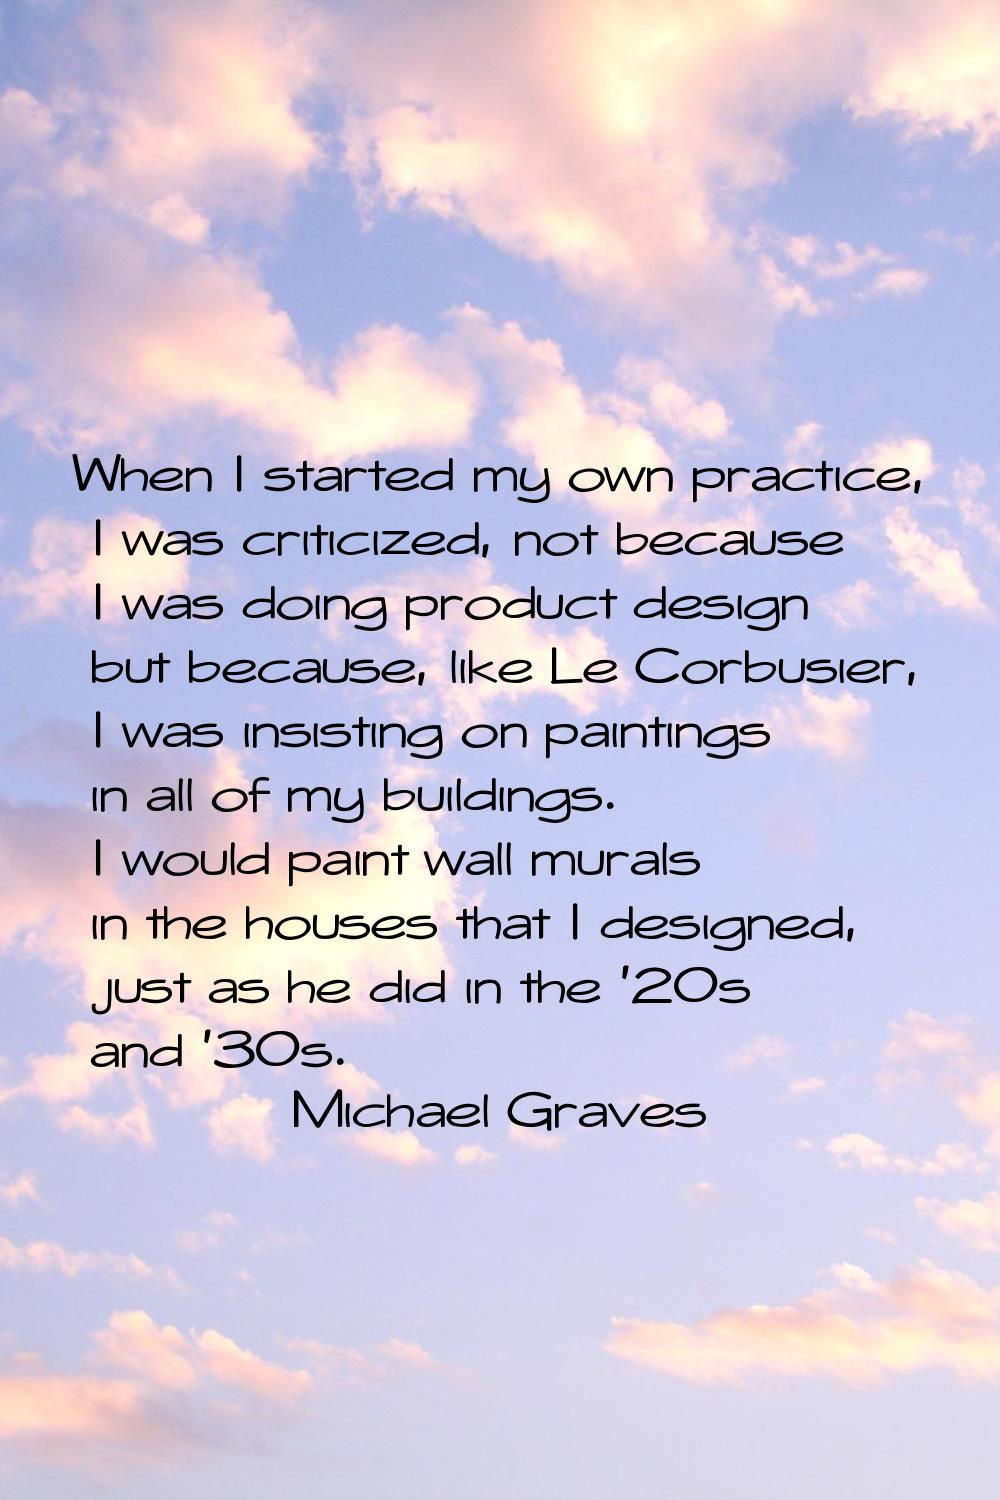 When I started my own practice, I was criticized, not because I was doing product design but becaus